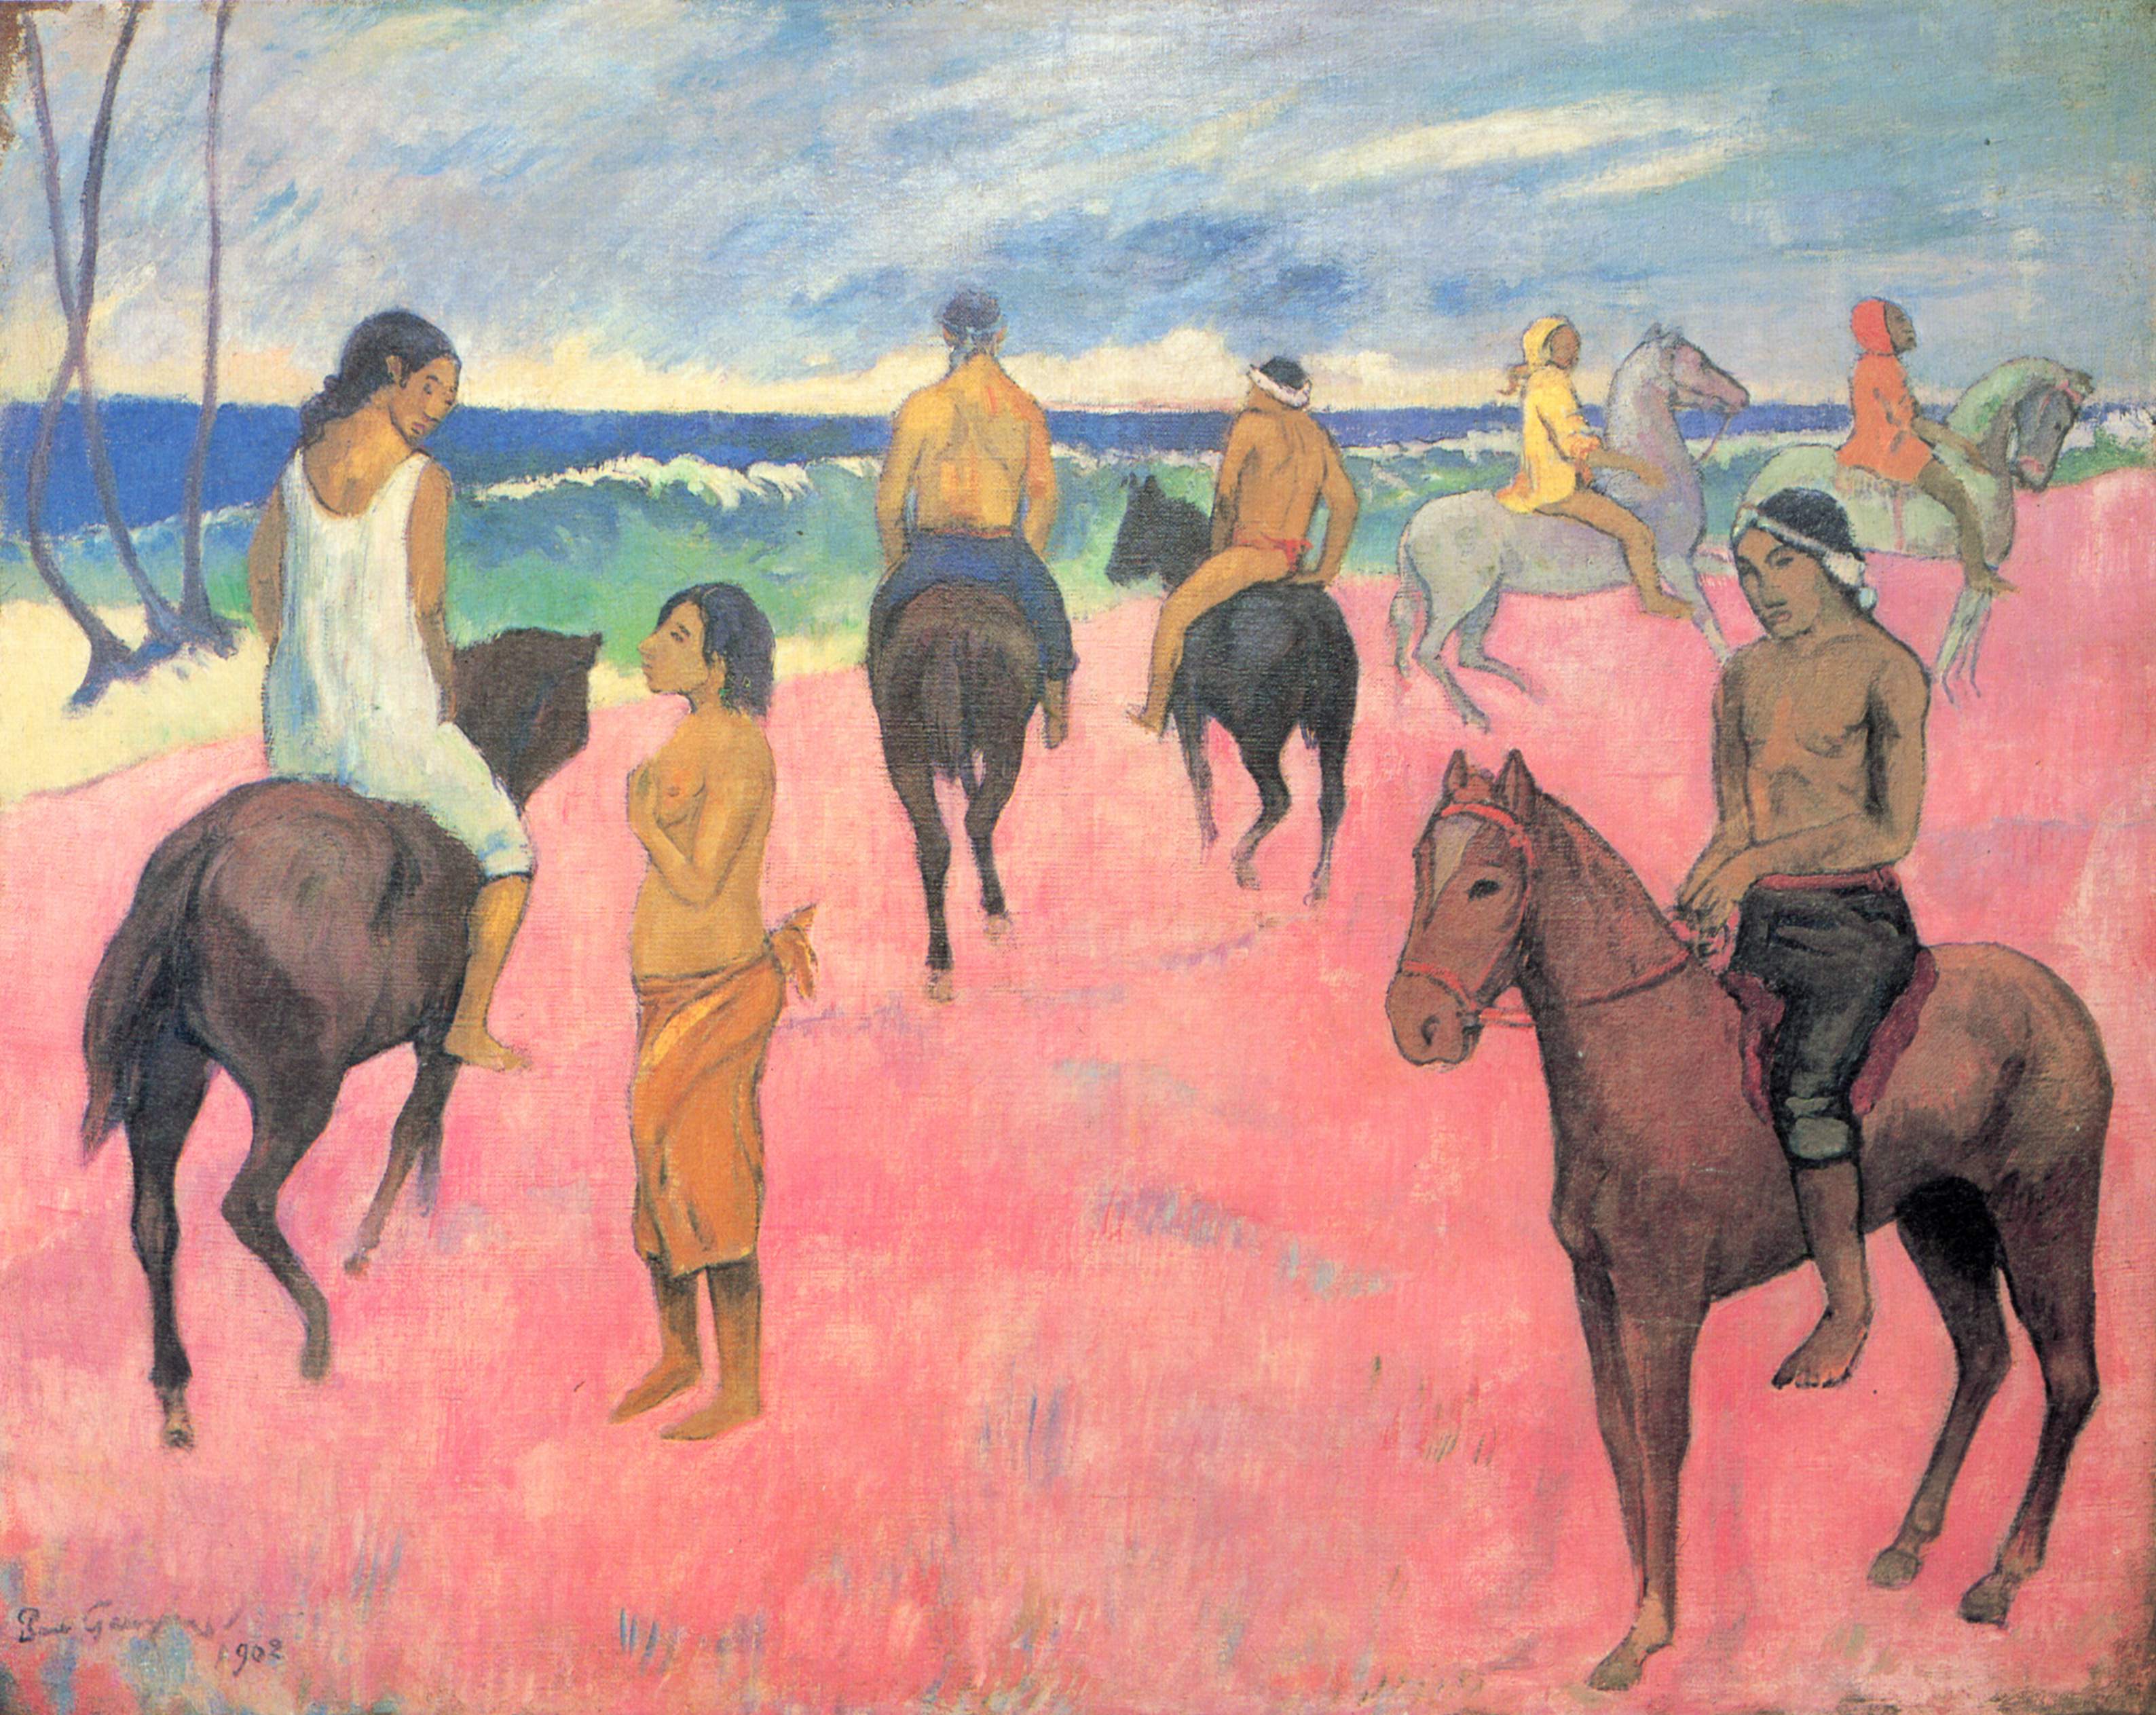 Riders on the Beach by Paul Gauguin - 1902 - 73 × 92 cm private collection